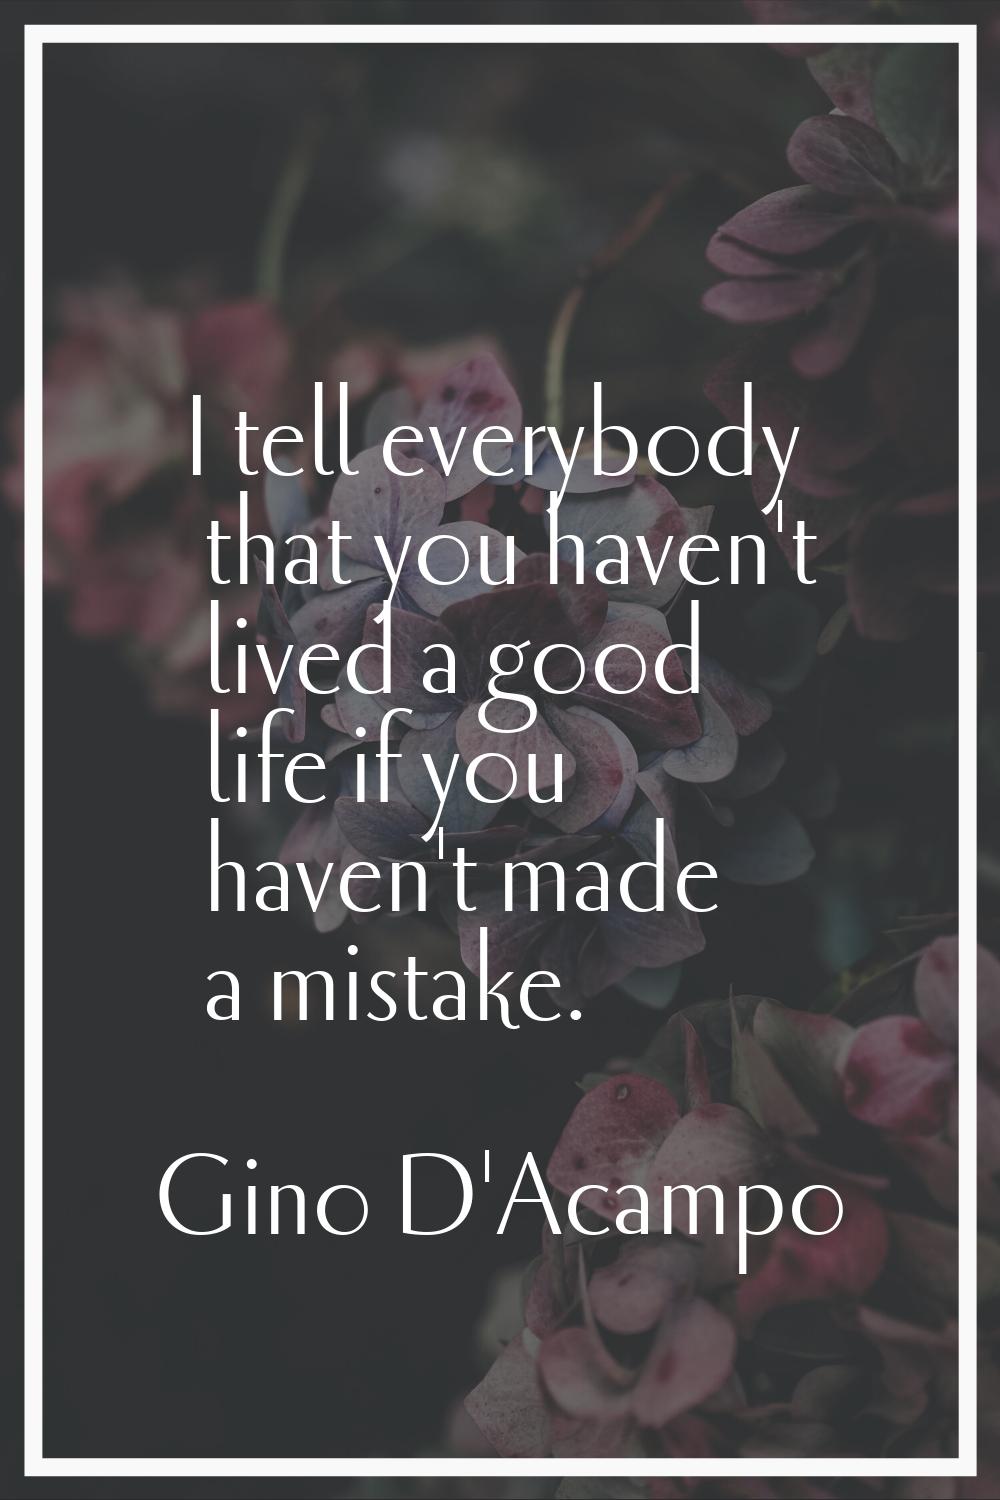 I tell everybody that you haven't lived a good life if you haven't made a mistake.